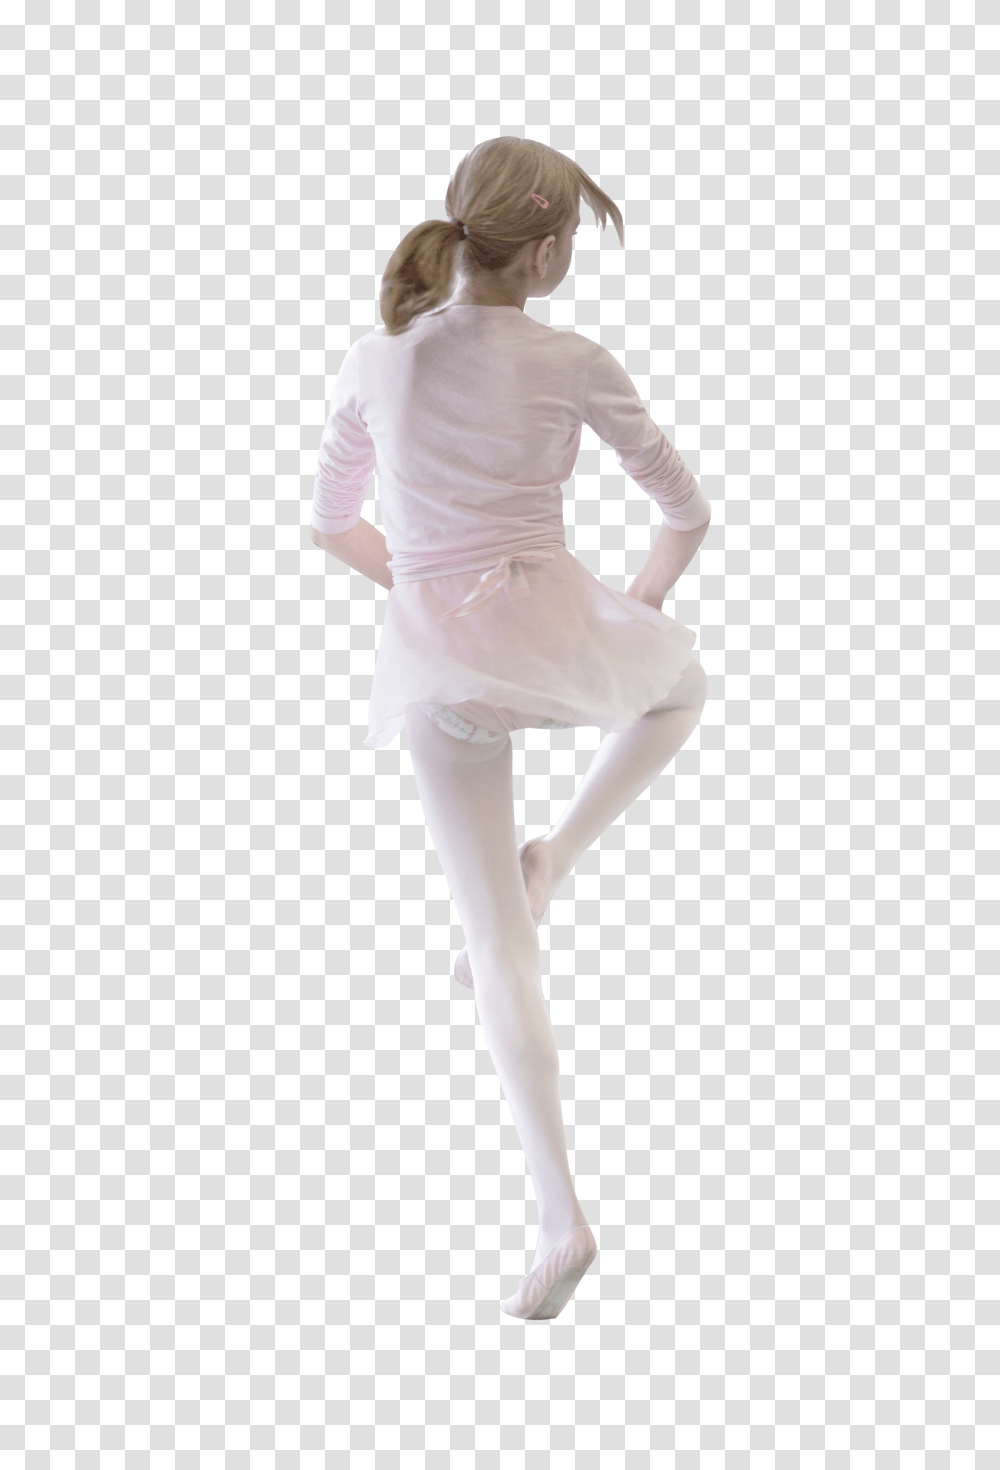 Dance, Dancing, Couple, Arts, Show, People, Pngs, Person, Human, Ballet, Leisure Activities Transparent Png